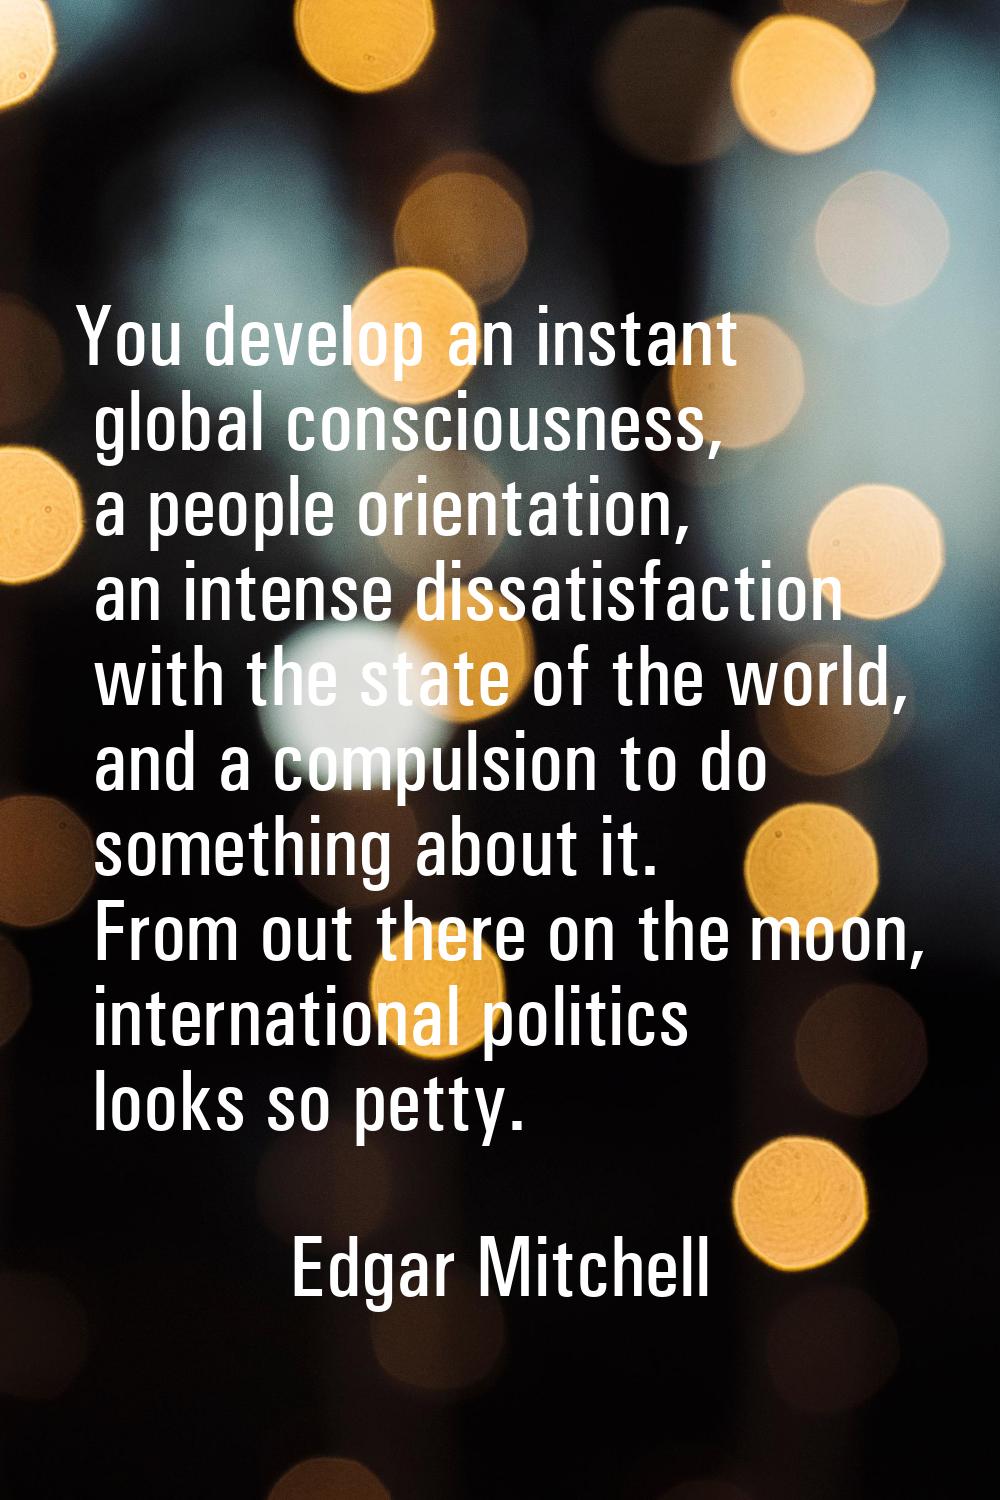 You develop an instant global consciousness, a people orientation, an intense dissatisfaction with 